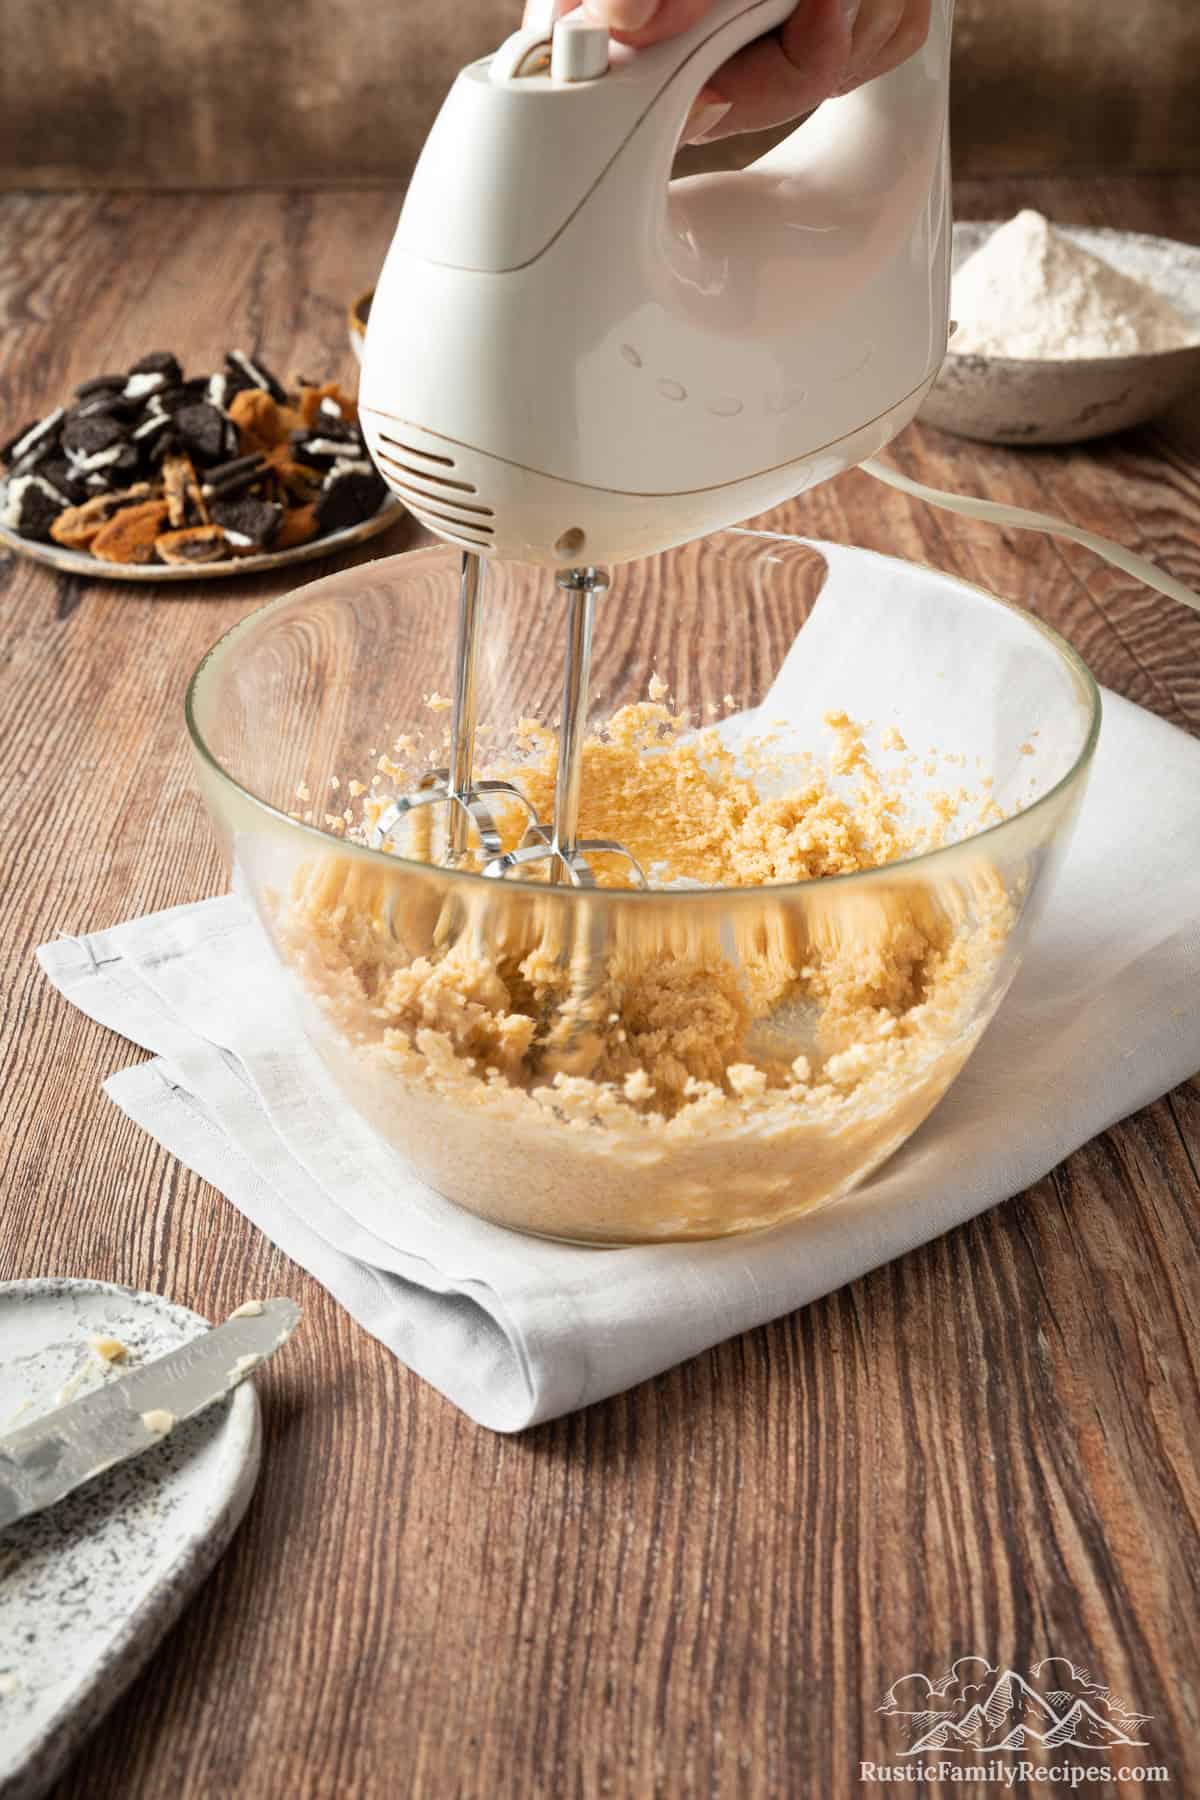 Cookie dough ingredients are beaten together in a glass mixing bowl with a stand mixer.